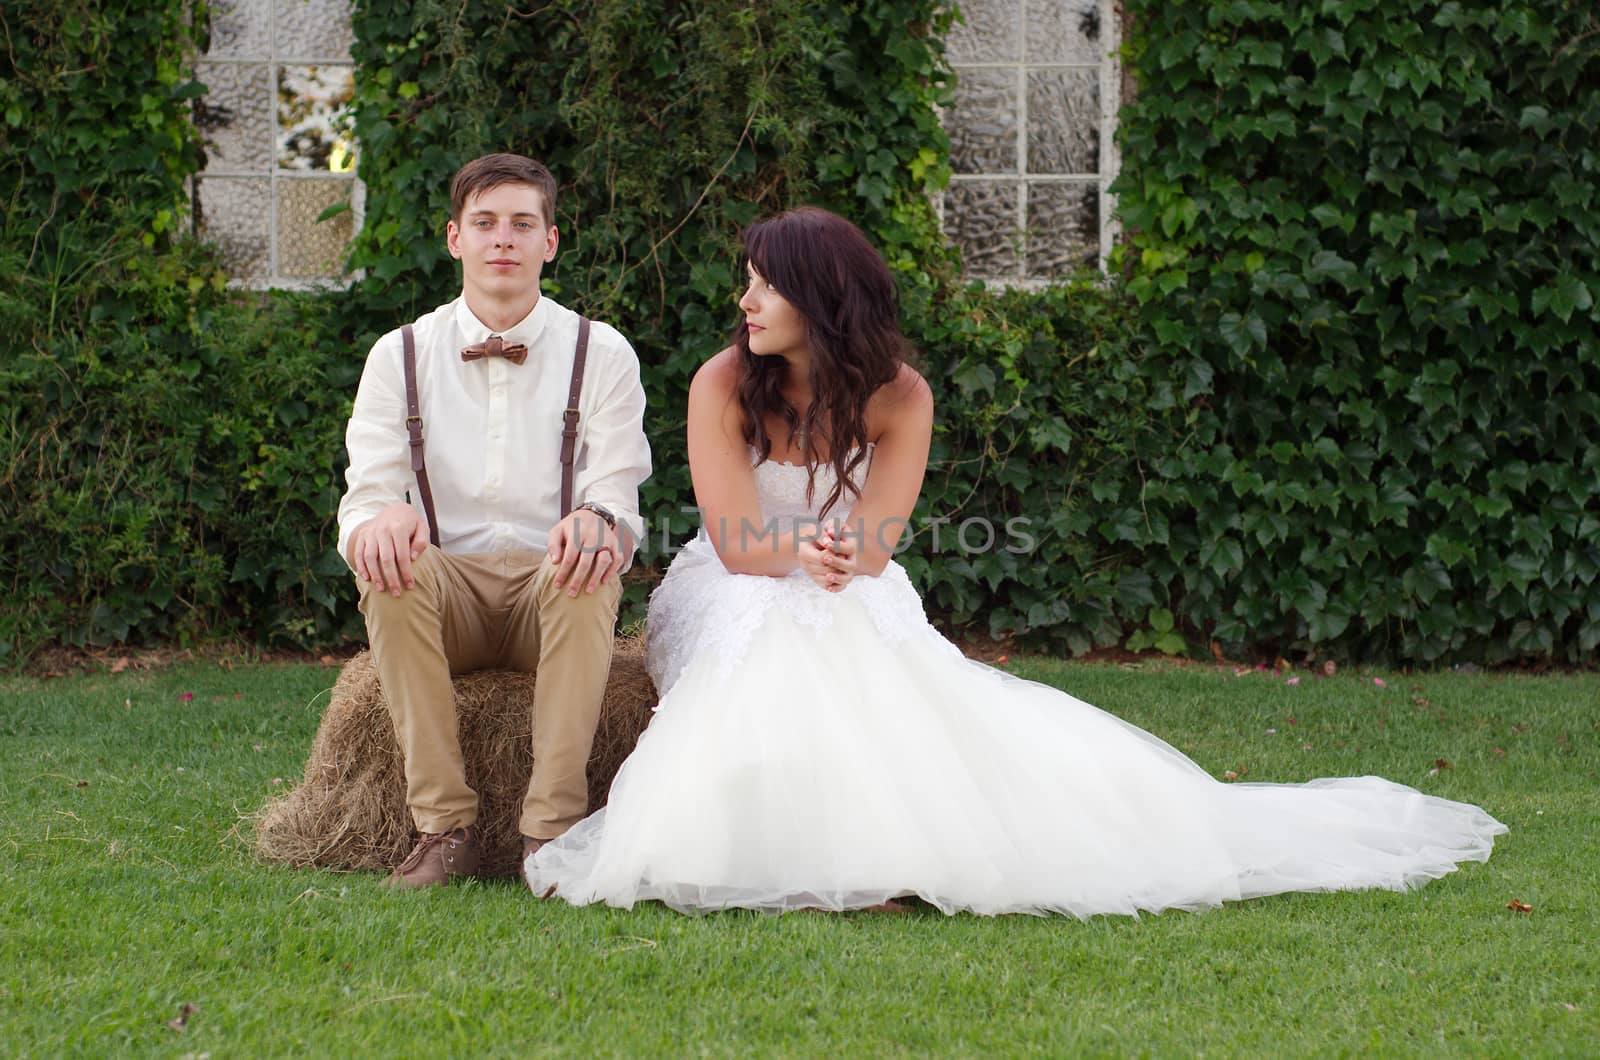 Hillbilly hipster vintage style bride and groom outside church after wedding ceremony